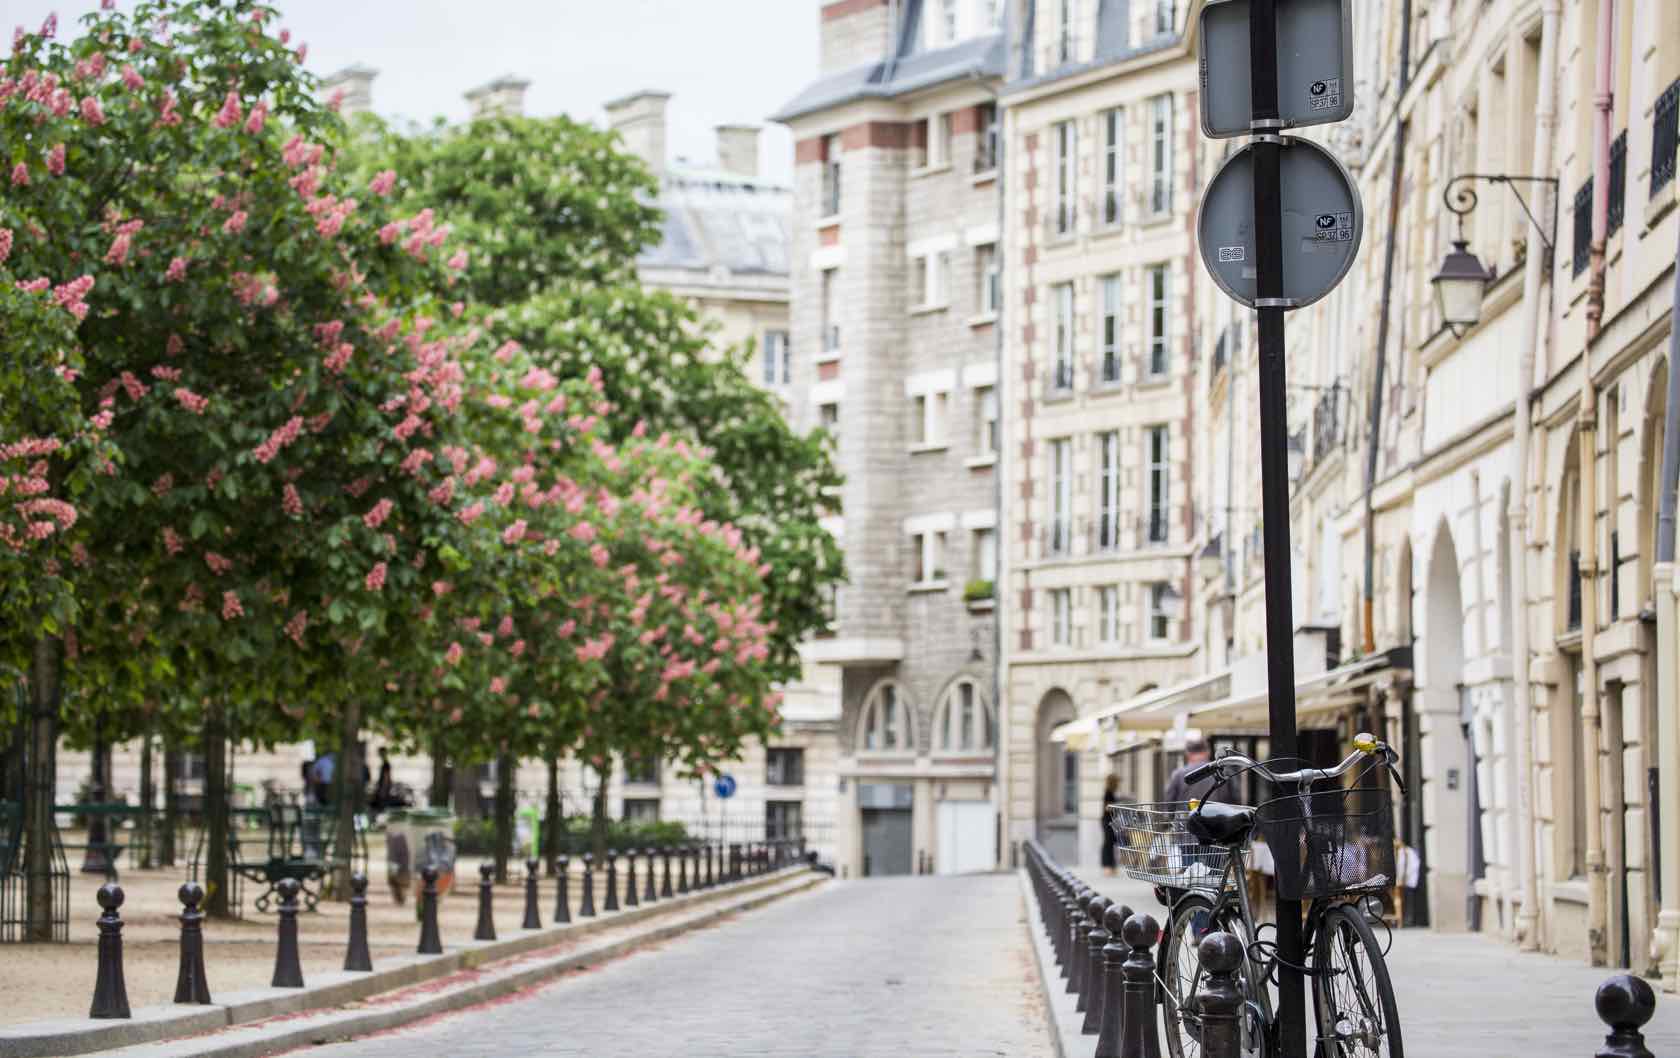 15 of the Most Beautiful Squares in Paris